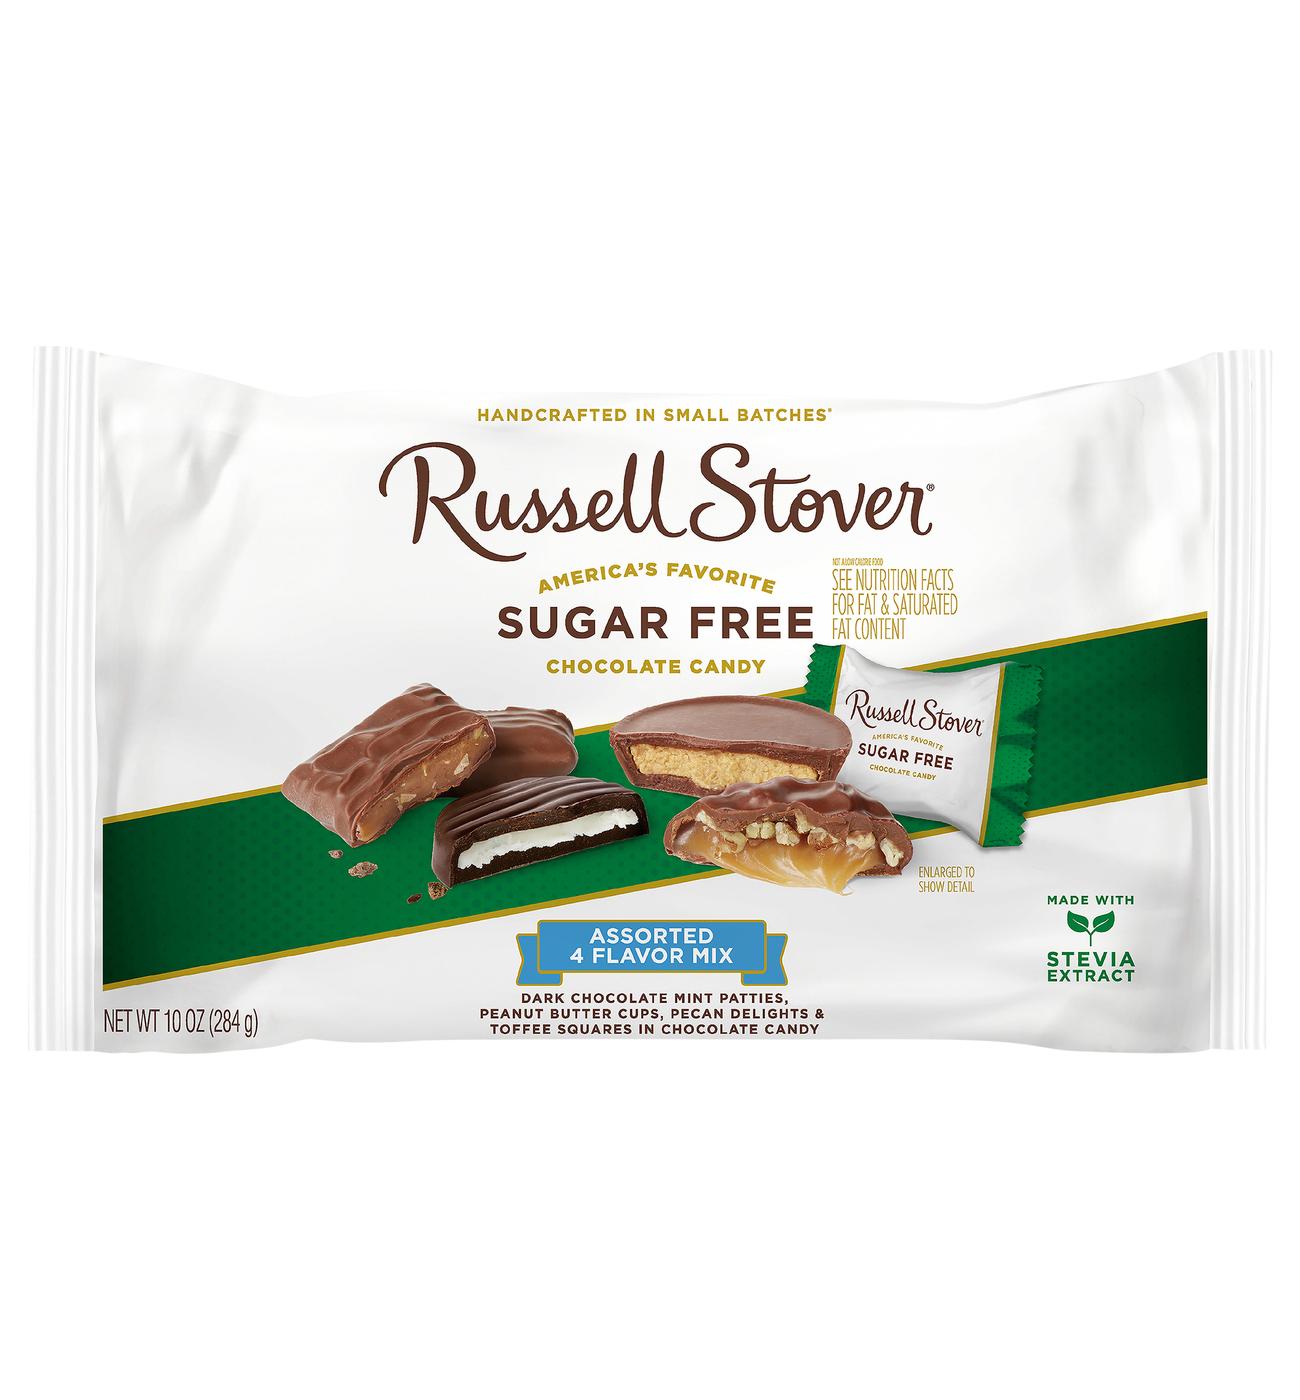 Russell Stover Sugar Free Assorted 4 Flavor Mix Candies; image 1 of 4